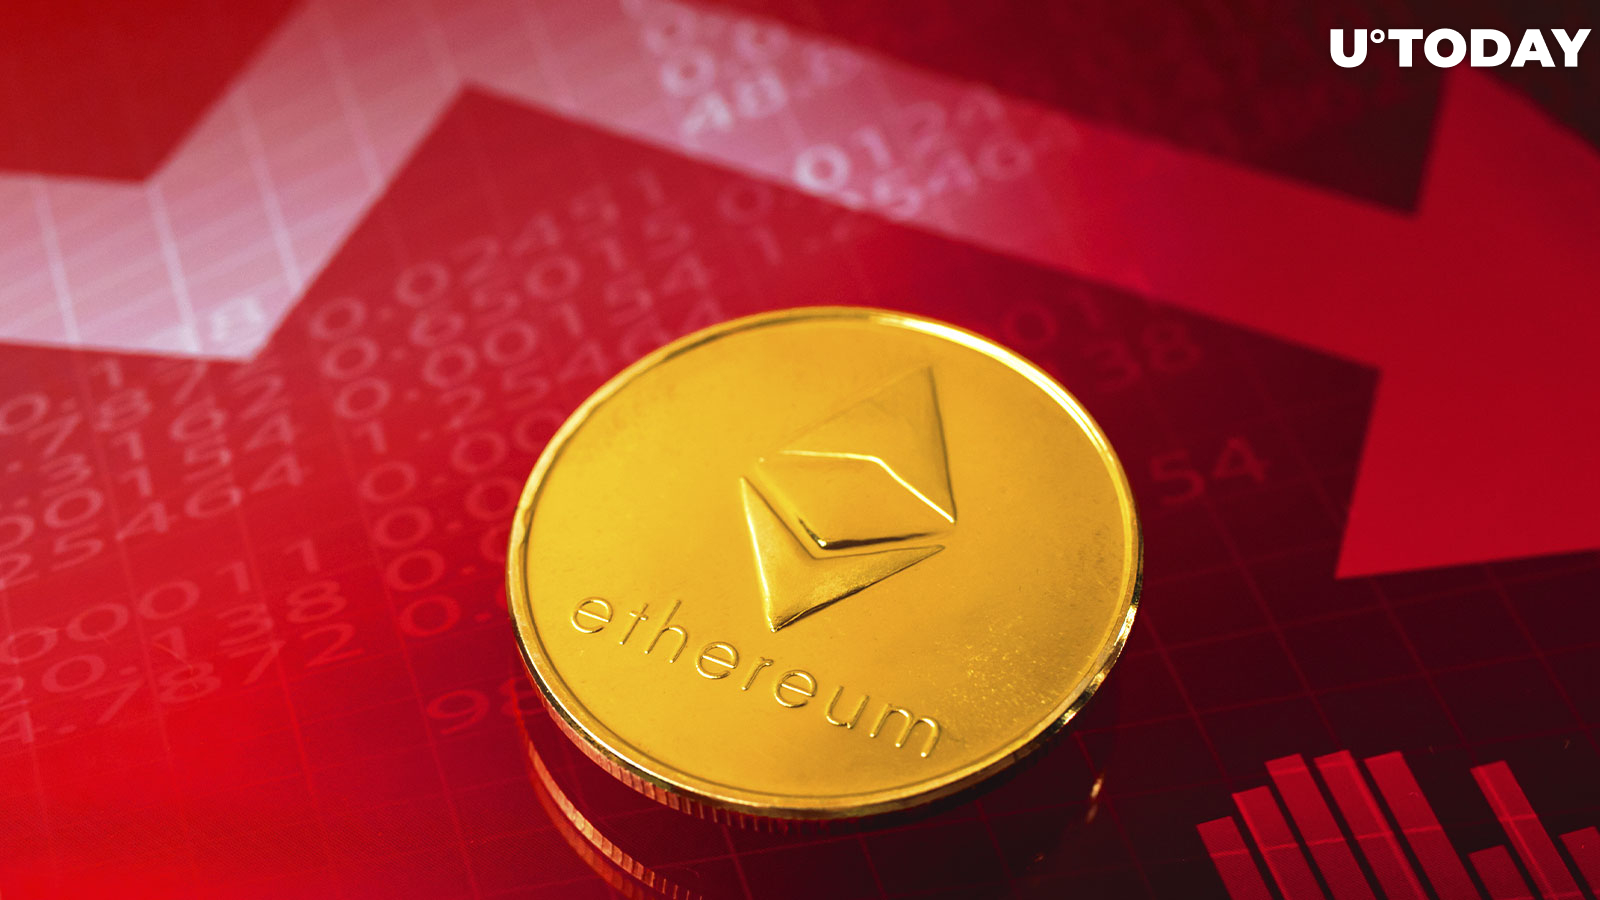 Here's Why Ethereum's Price Crashed So Low Since Merge: Details